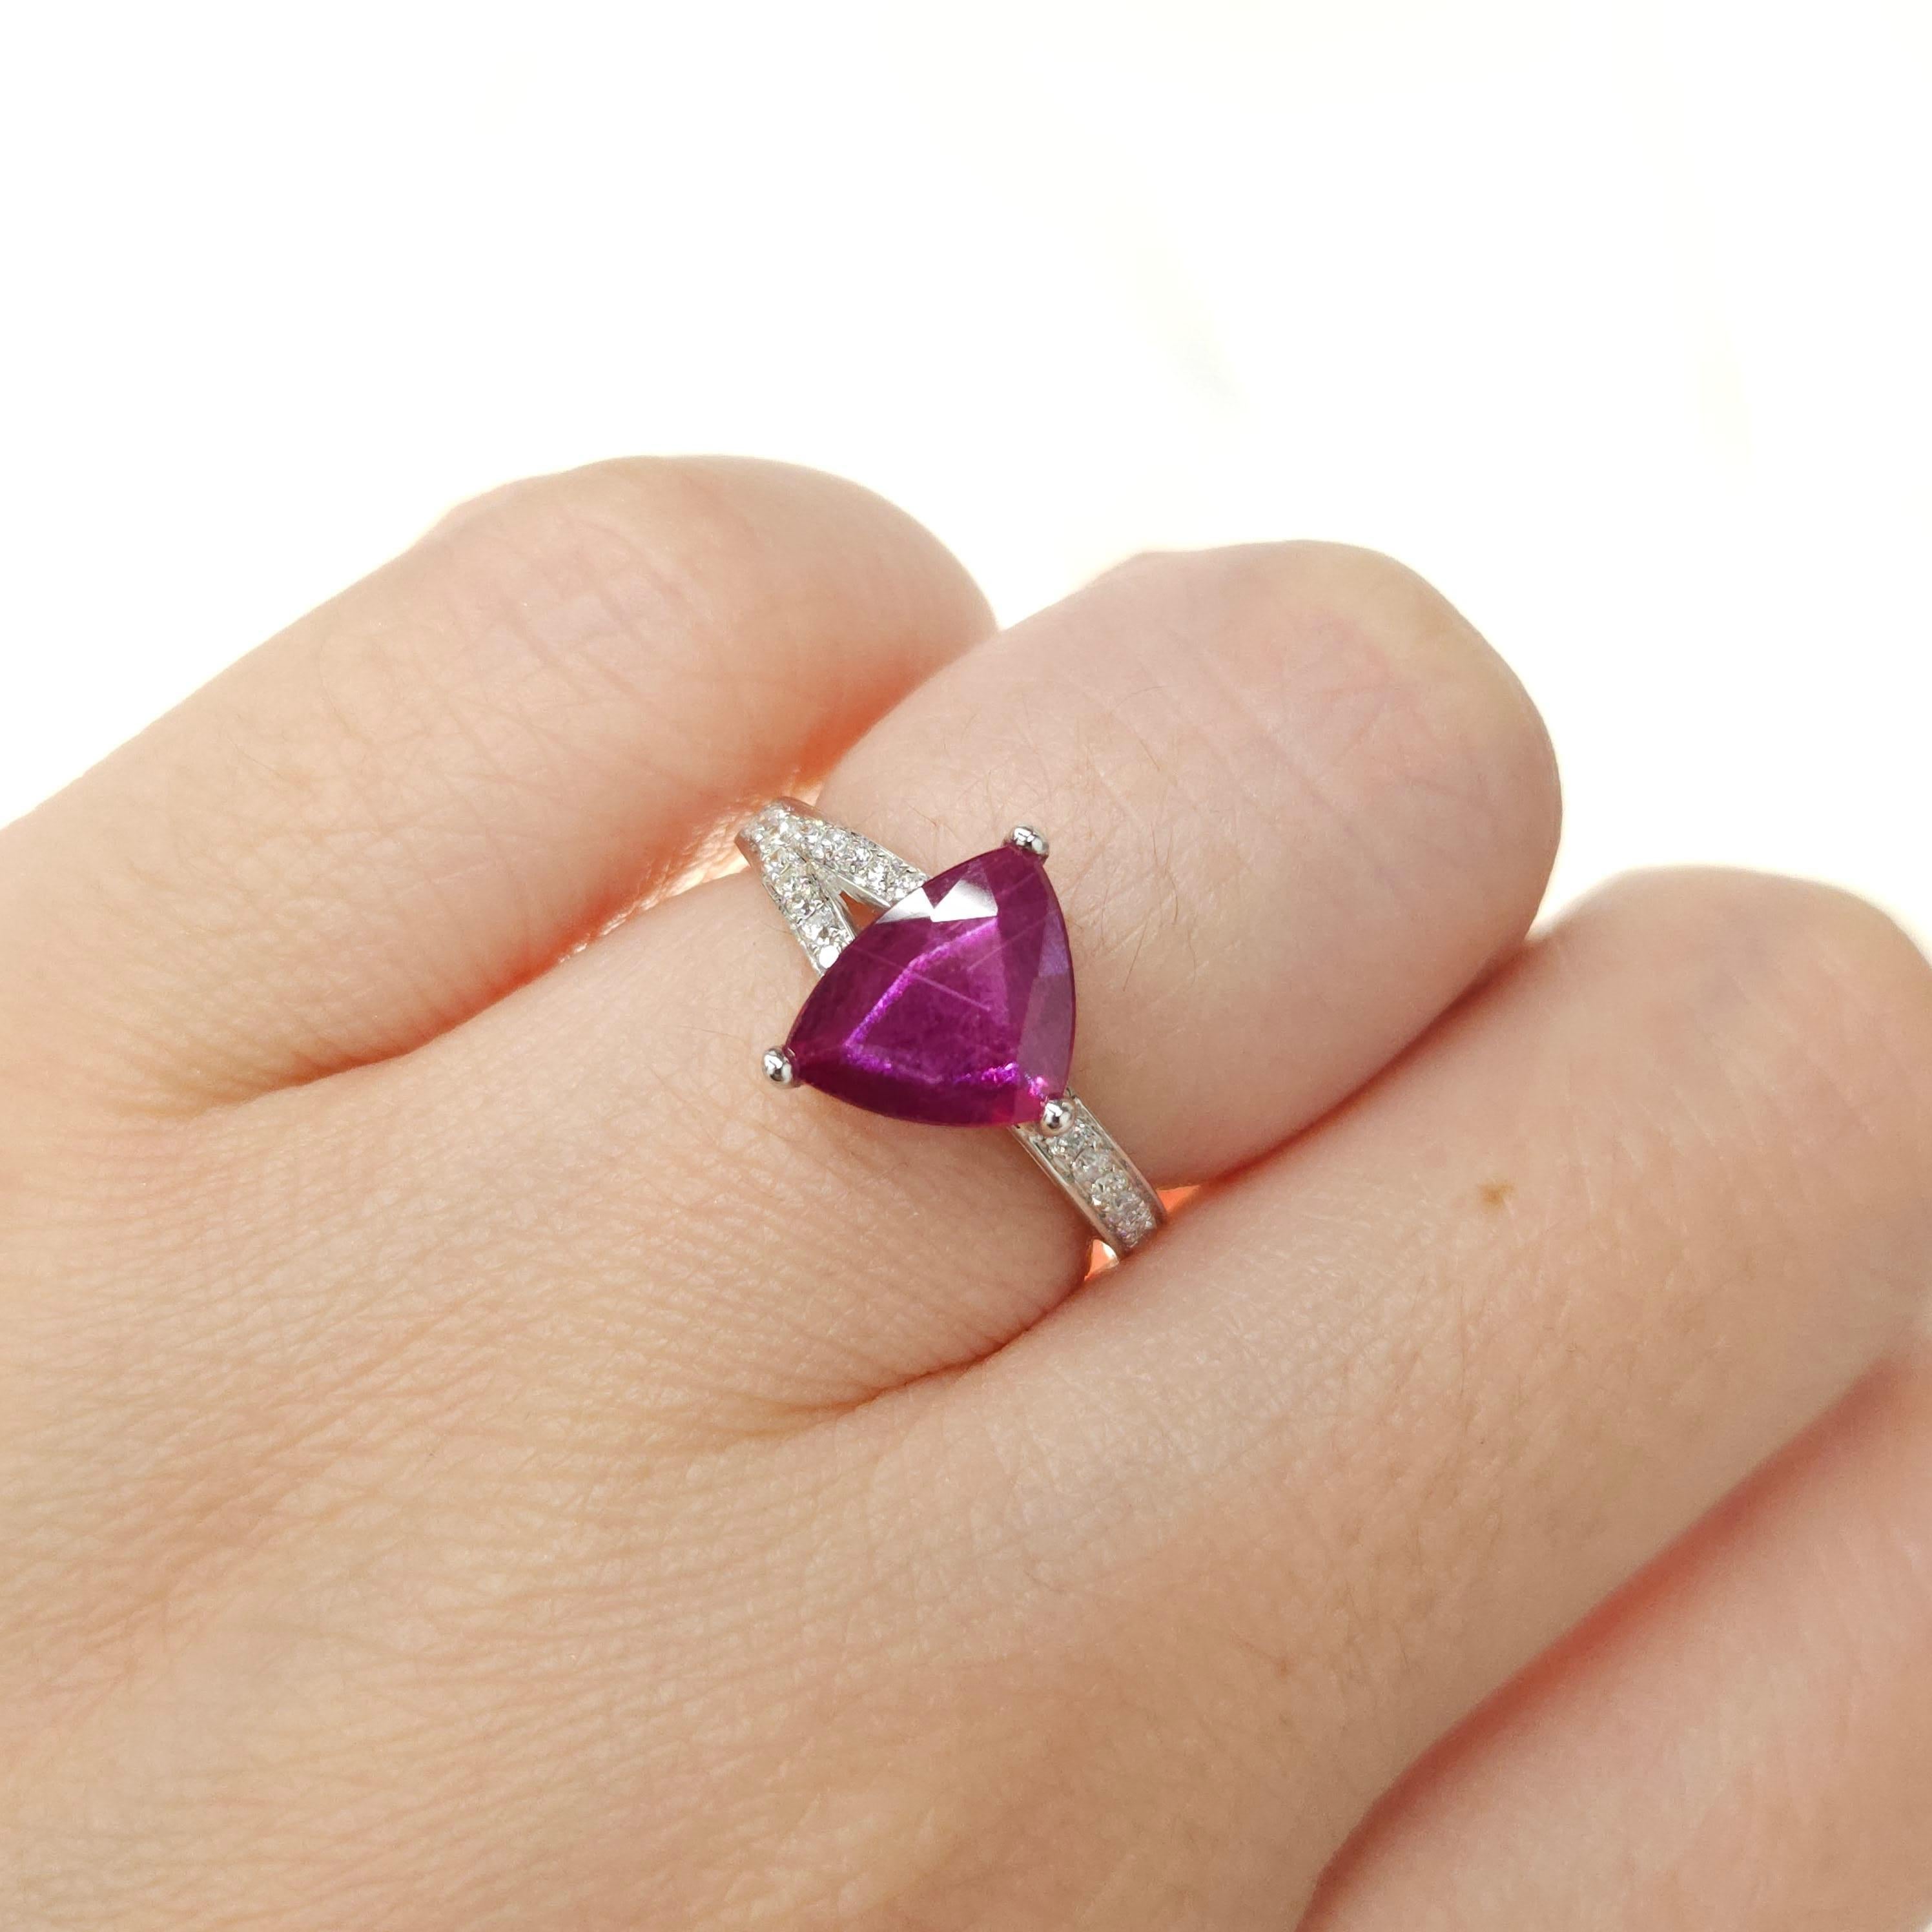 Round Cut IGI Certified 2.09 Carat Ruby & Diamond Ring in 18K White Gold For Sale